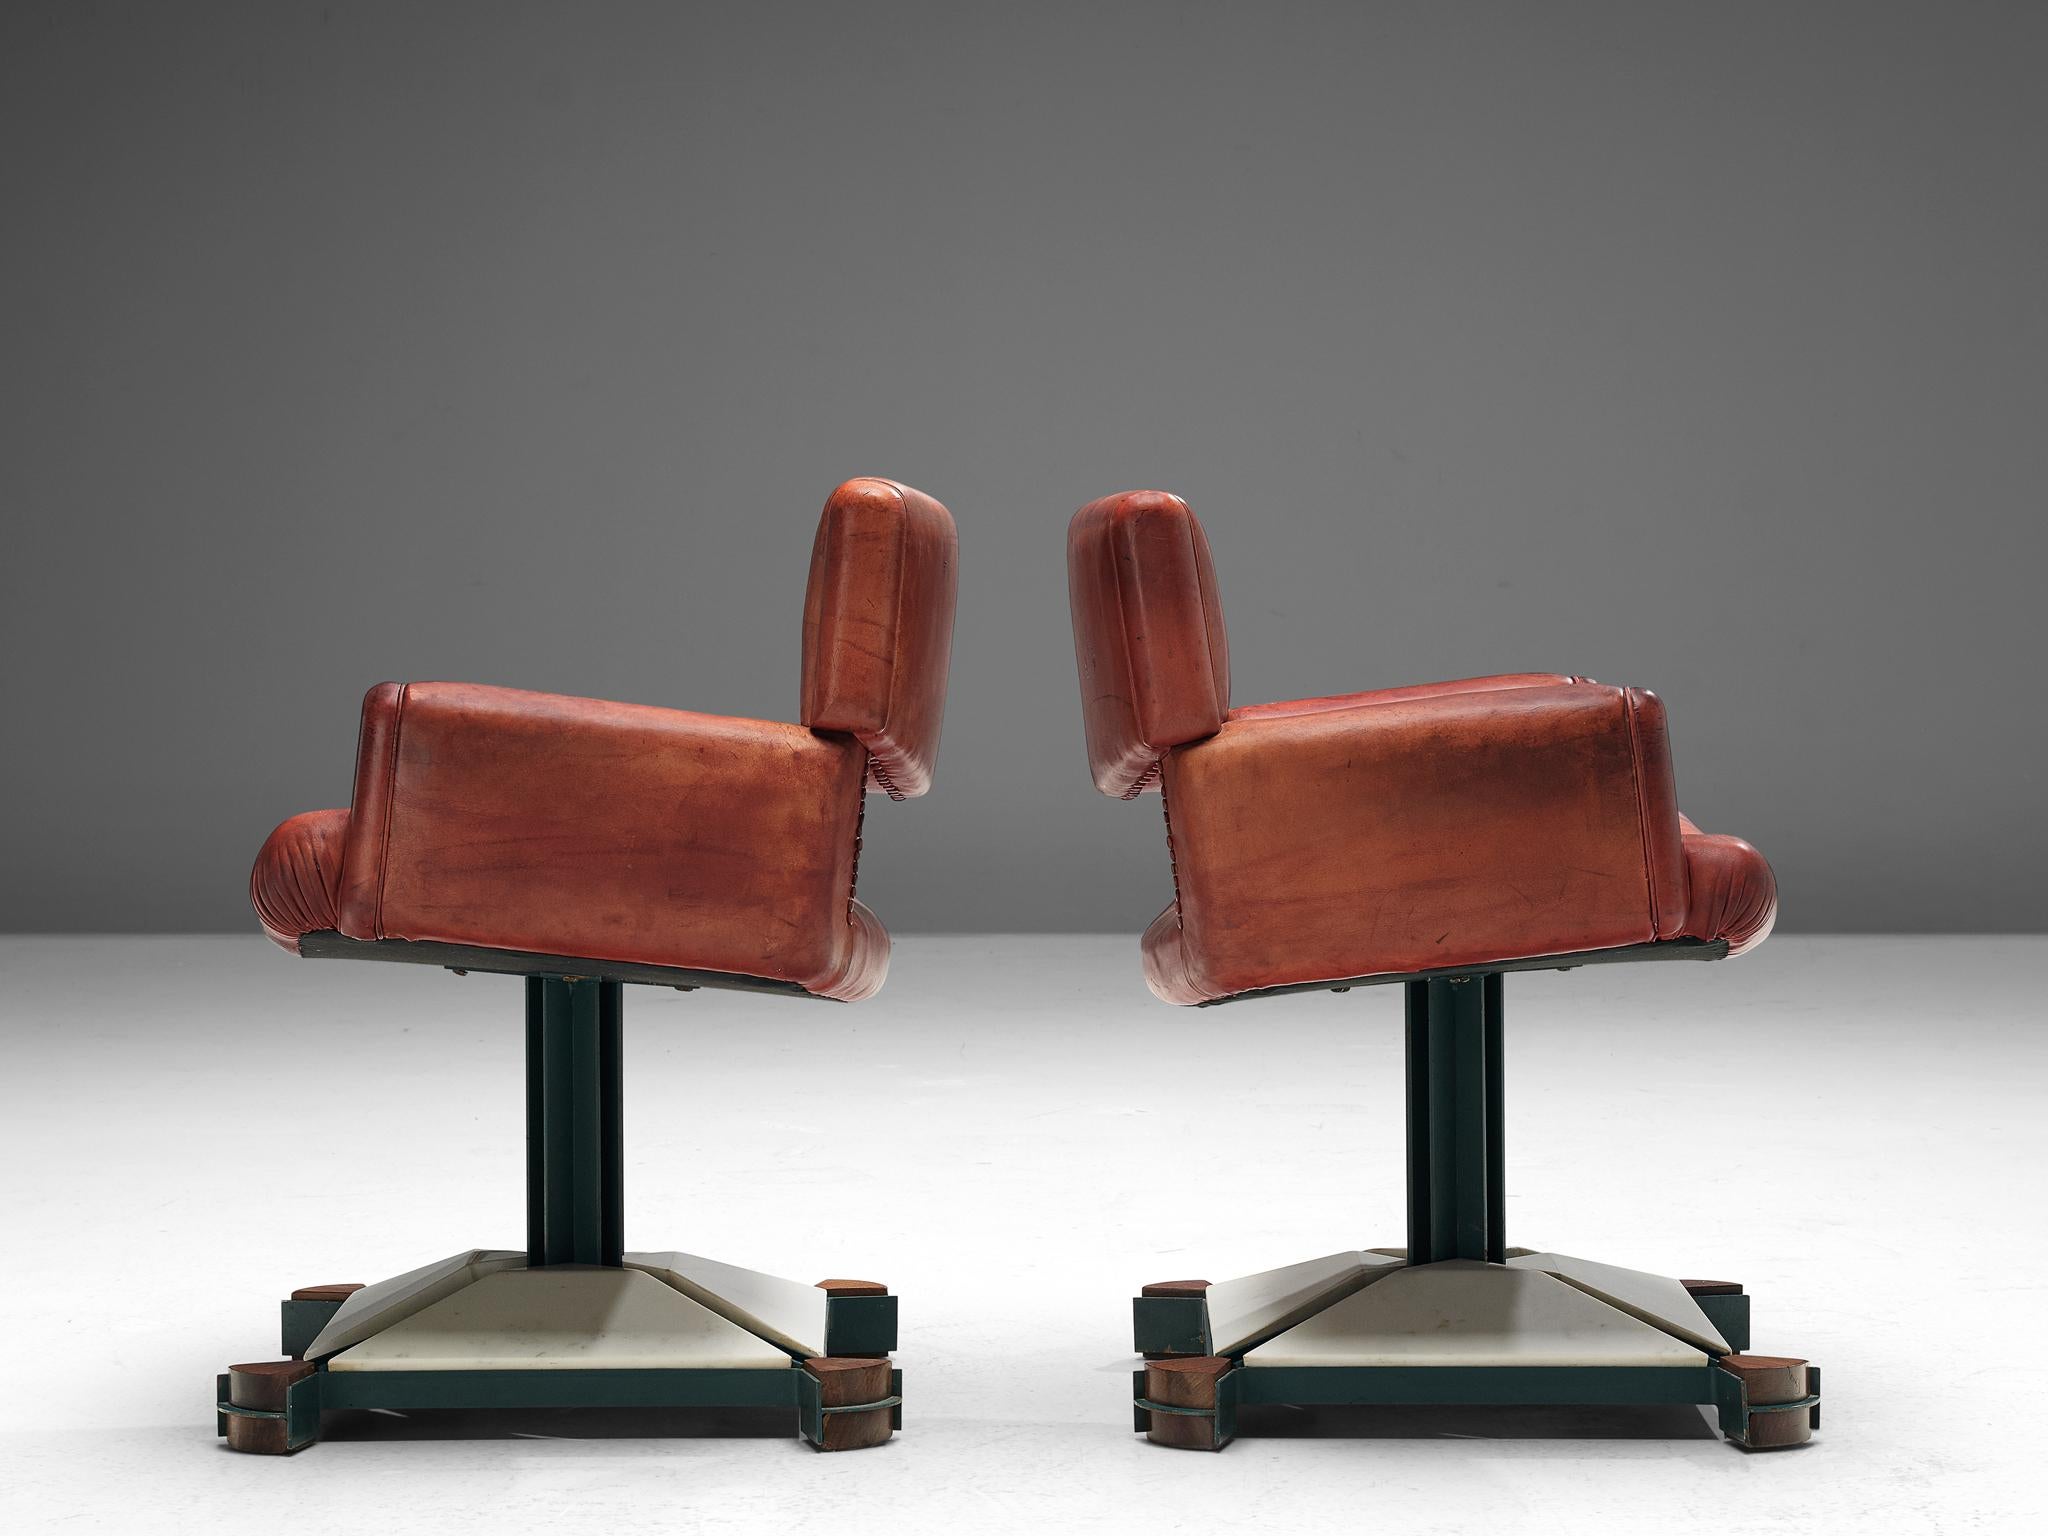 Steel Set of Chairs in Marble and Red Leather